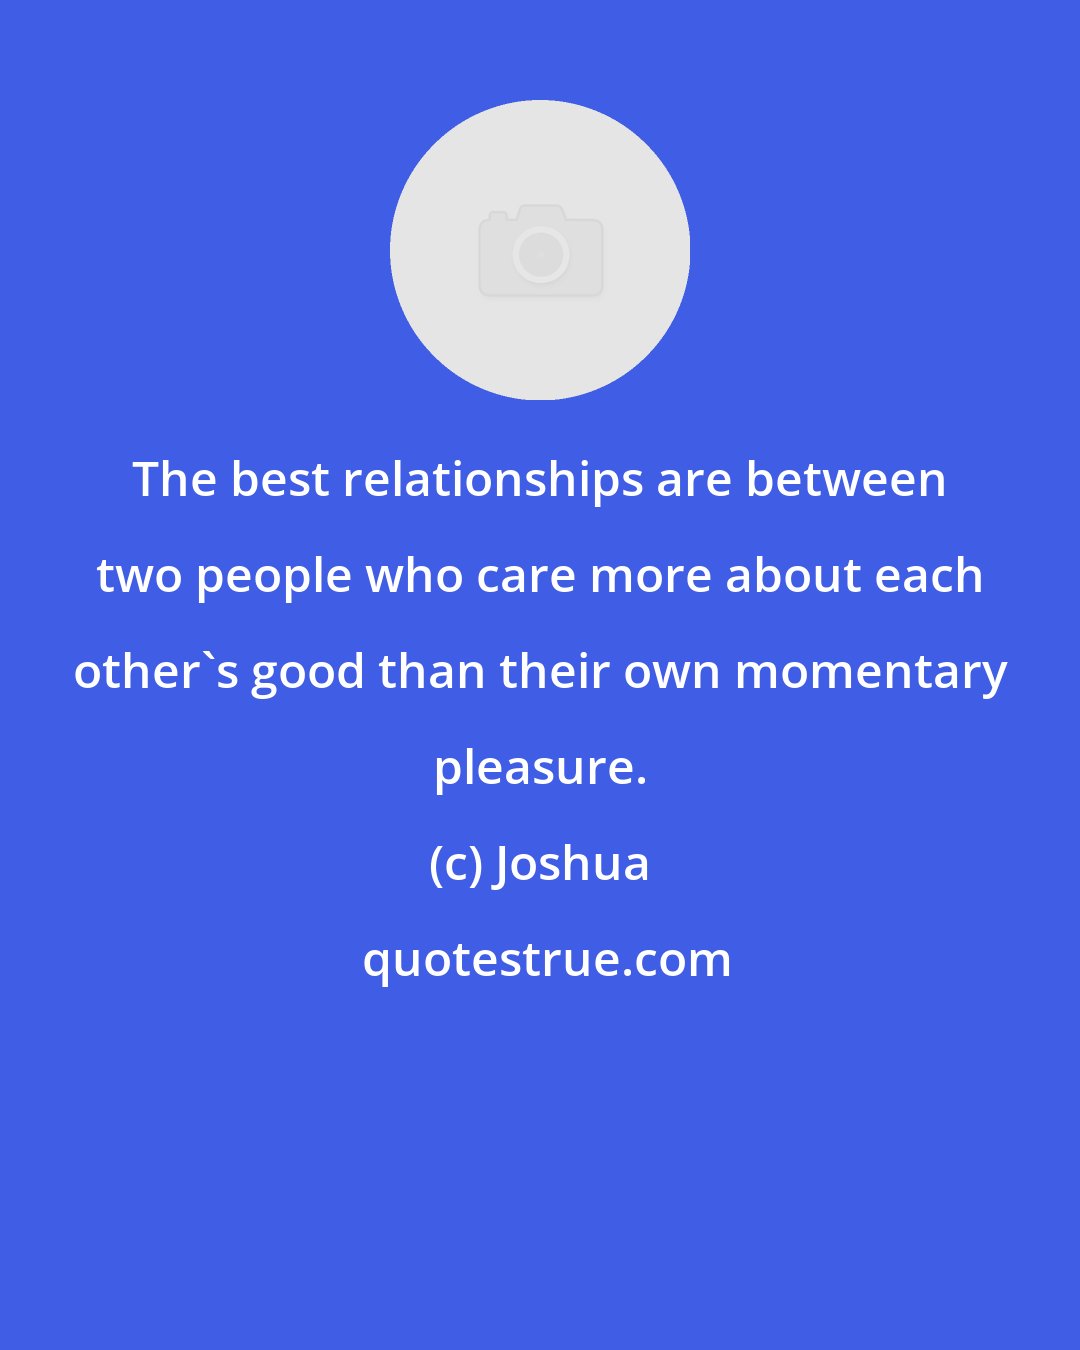 Joshua: The best relationships are between two people who care more about each other's good than their own momentary pleasure.